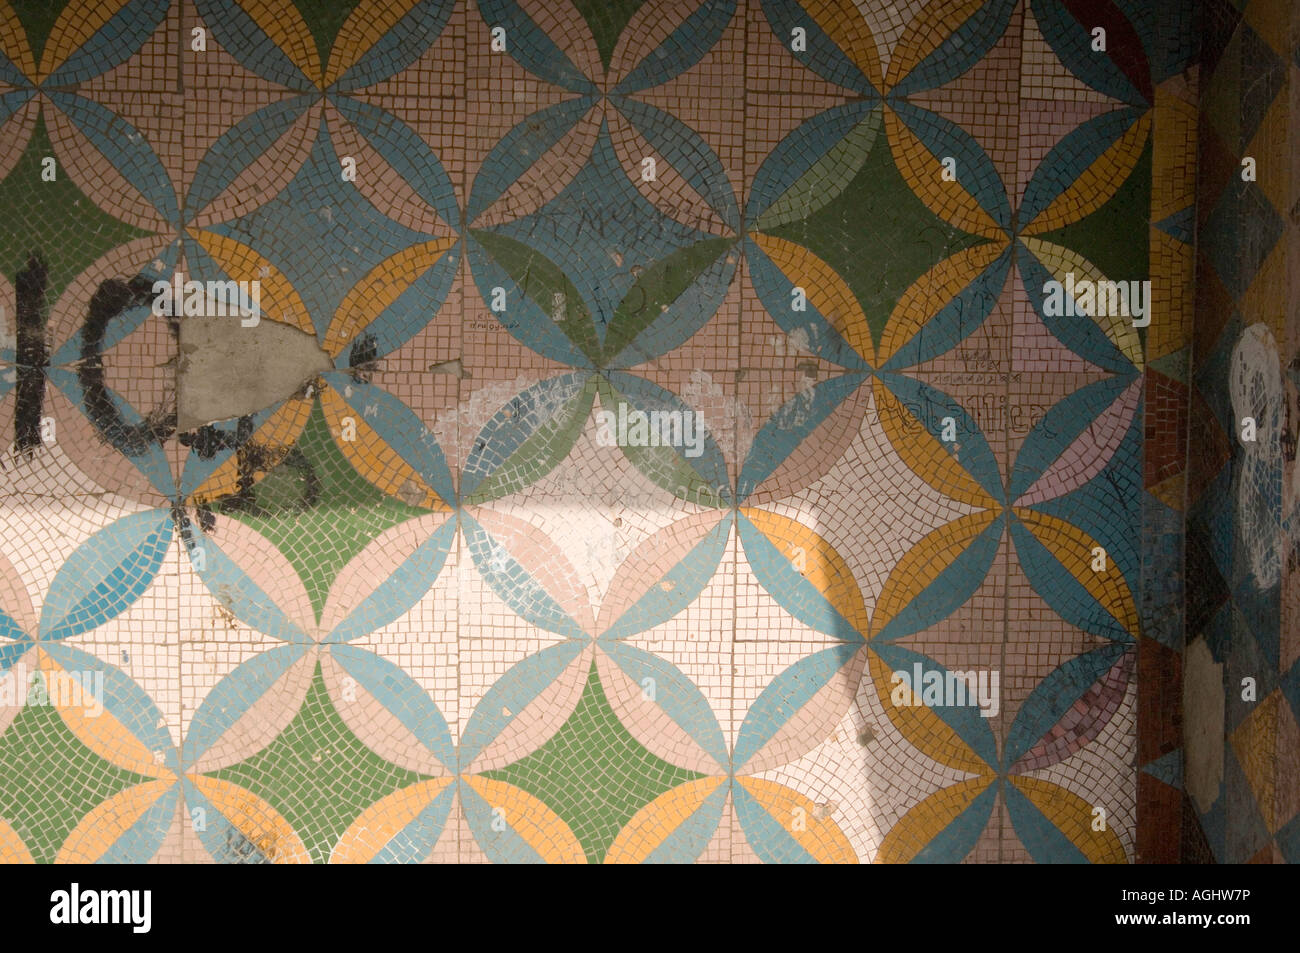 A mosaic inside an old bus shelter in the Elbrus region of Southwestern Russia Stock Photo